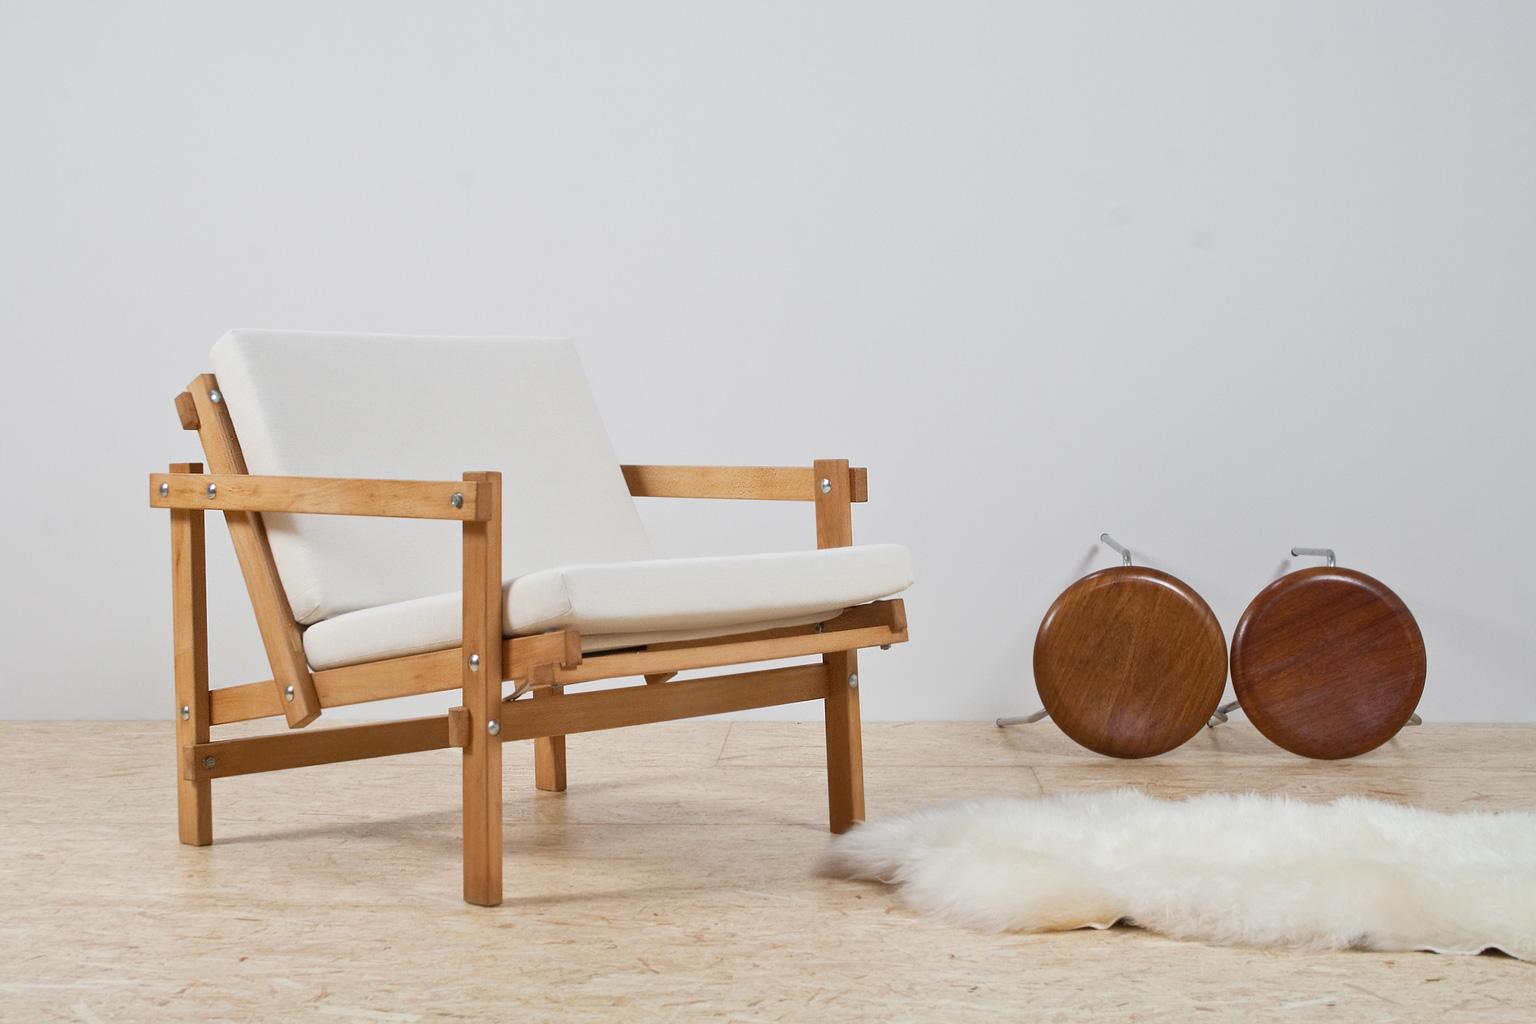 Great visual constructed lounge chair in beautiful natural beech wood, designed in 1974 by Martin Visser. The broad chair has a really great comfort and makes for a unique and quite rare object in your interior. We have an identical set in stock.